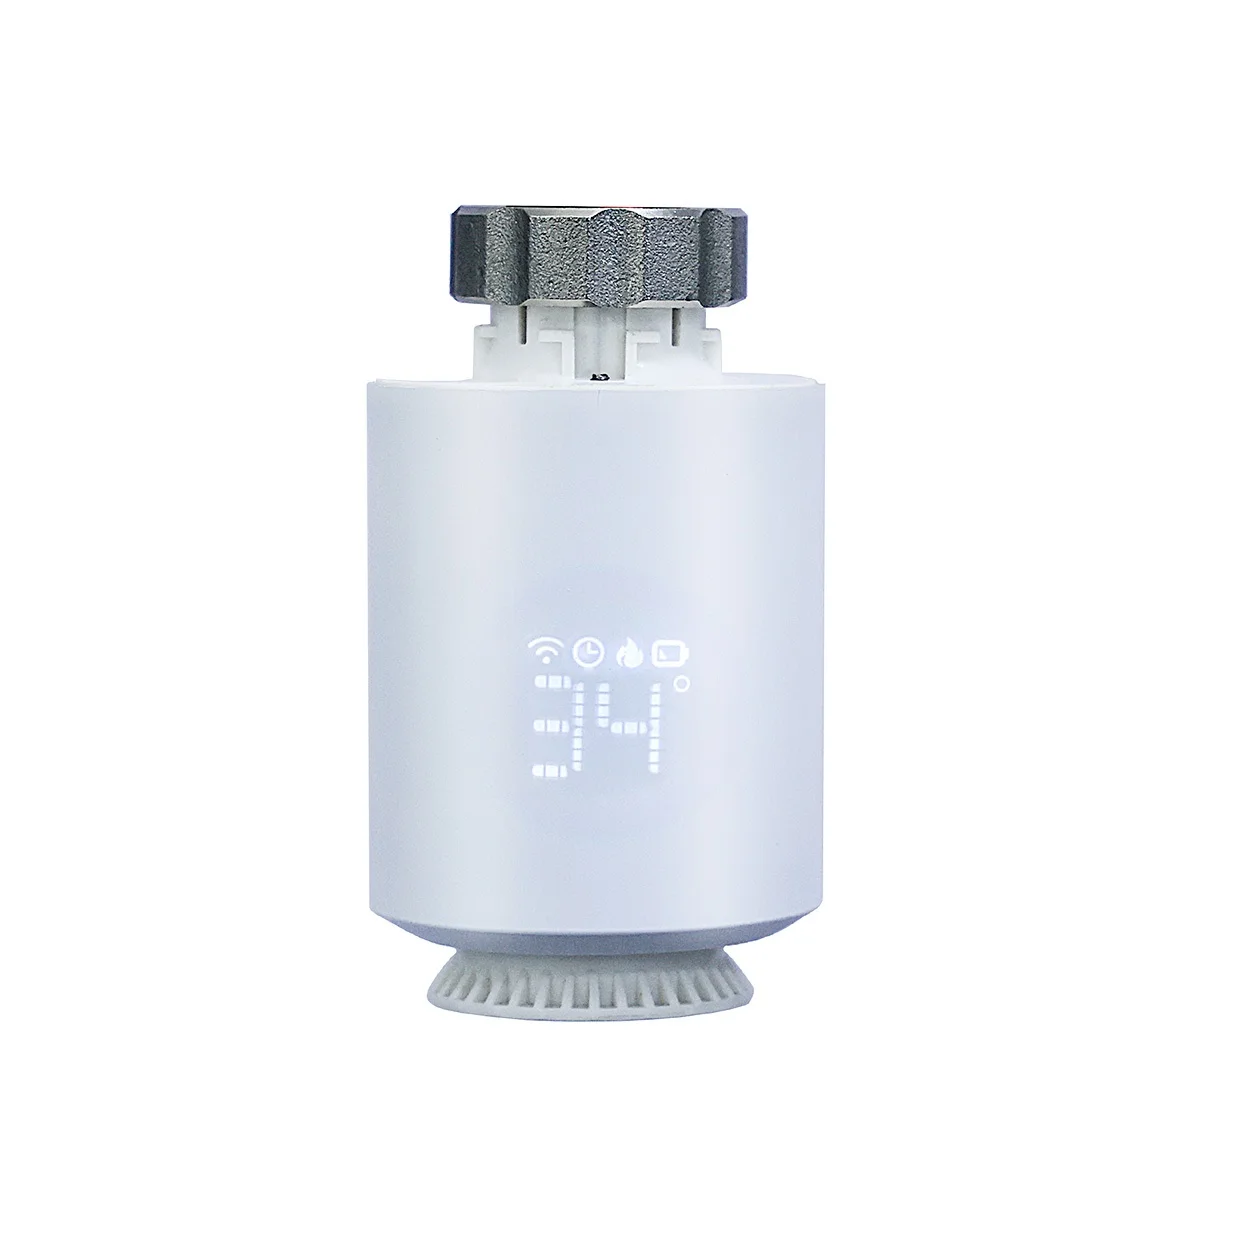 

Intelligent Thermostatic Radiator Valves Intelligent Wireless Mobilephone Control Home Heating Thermostat Temperature Control